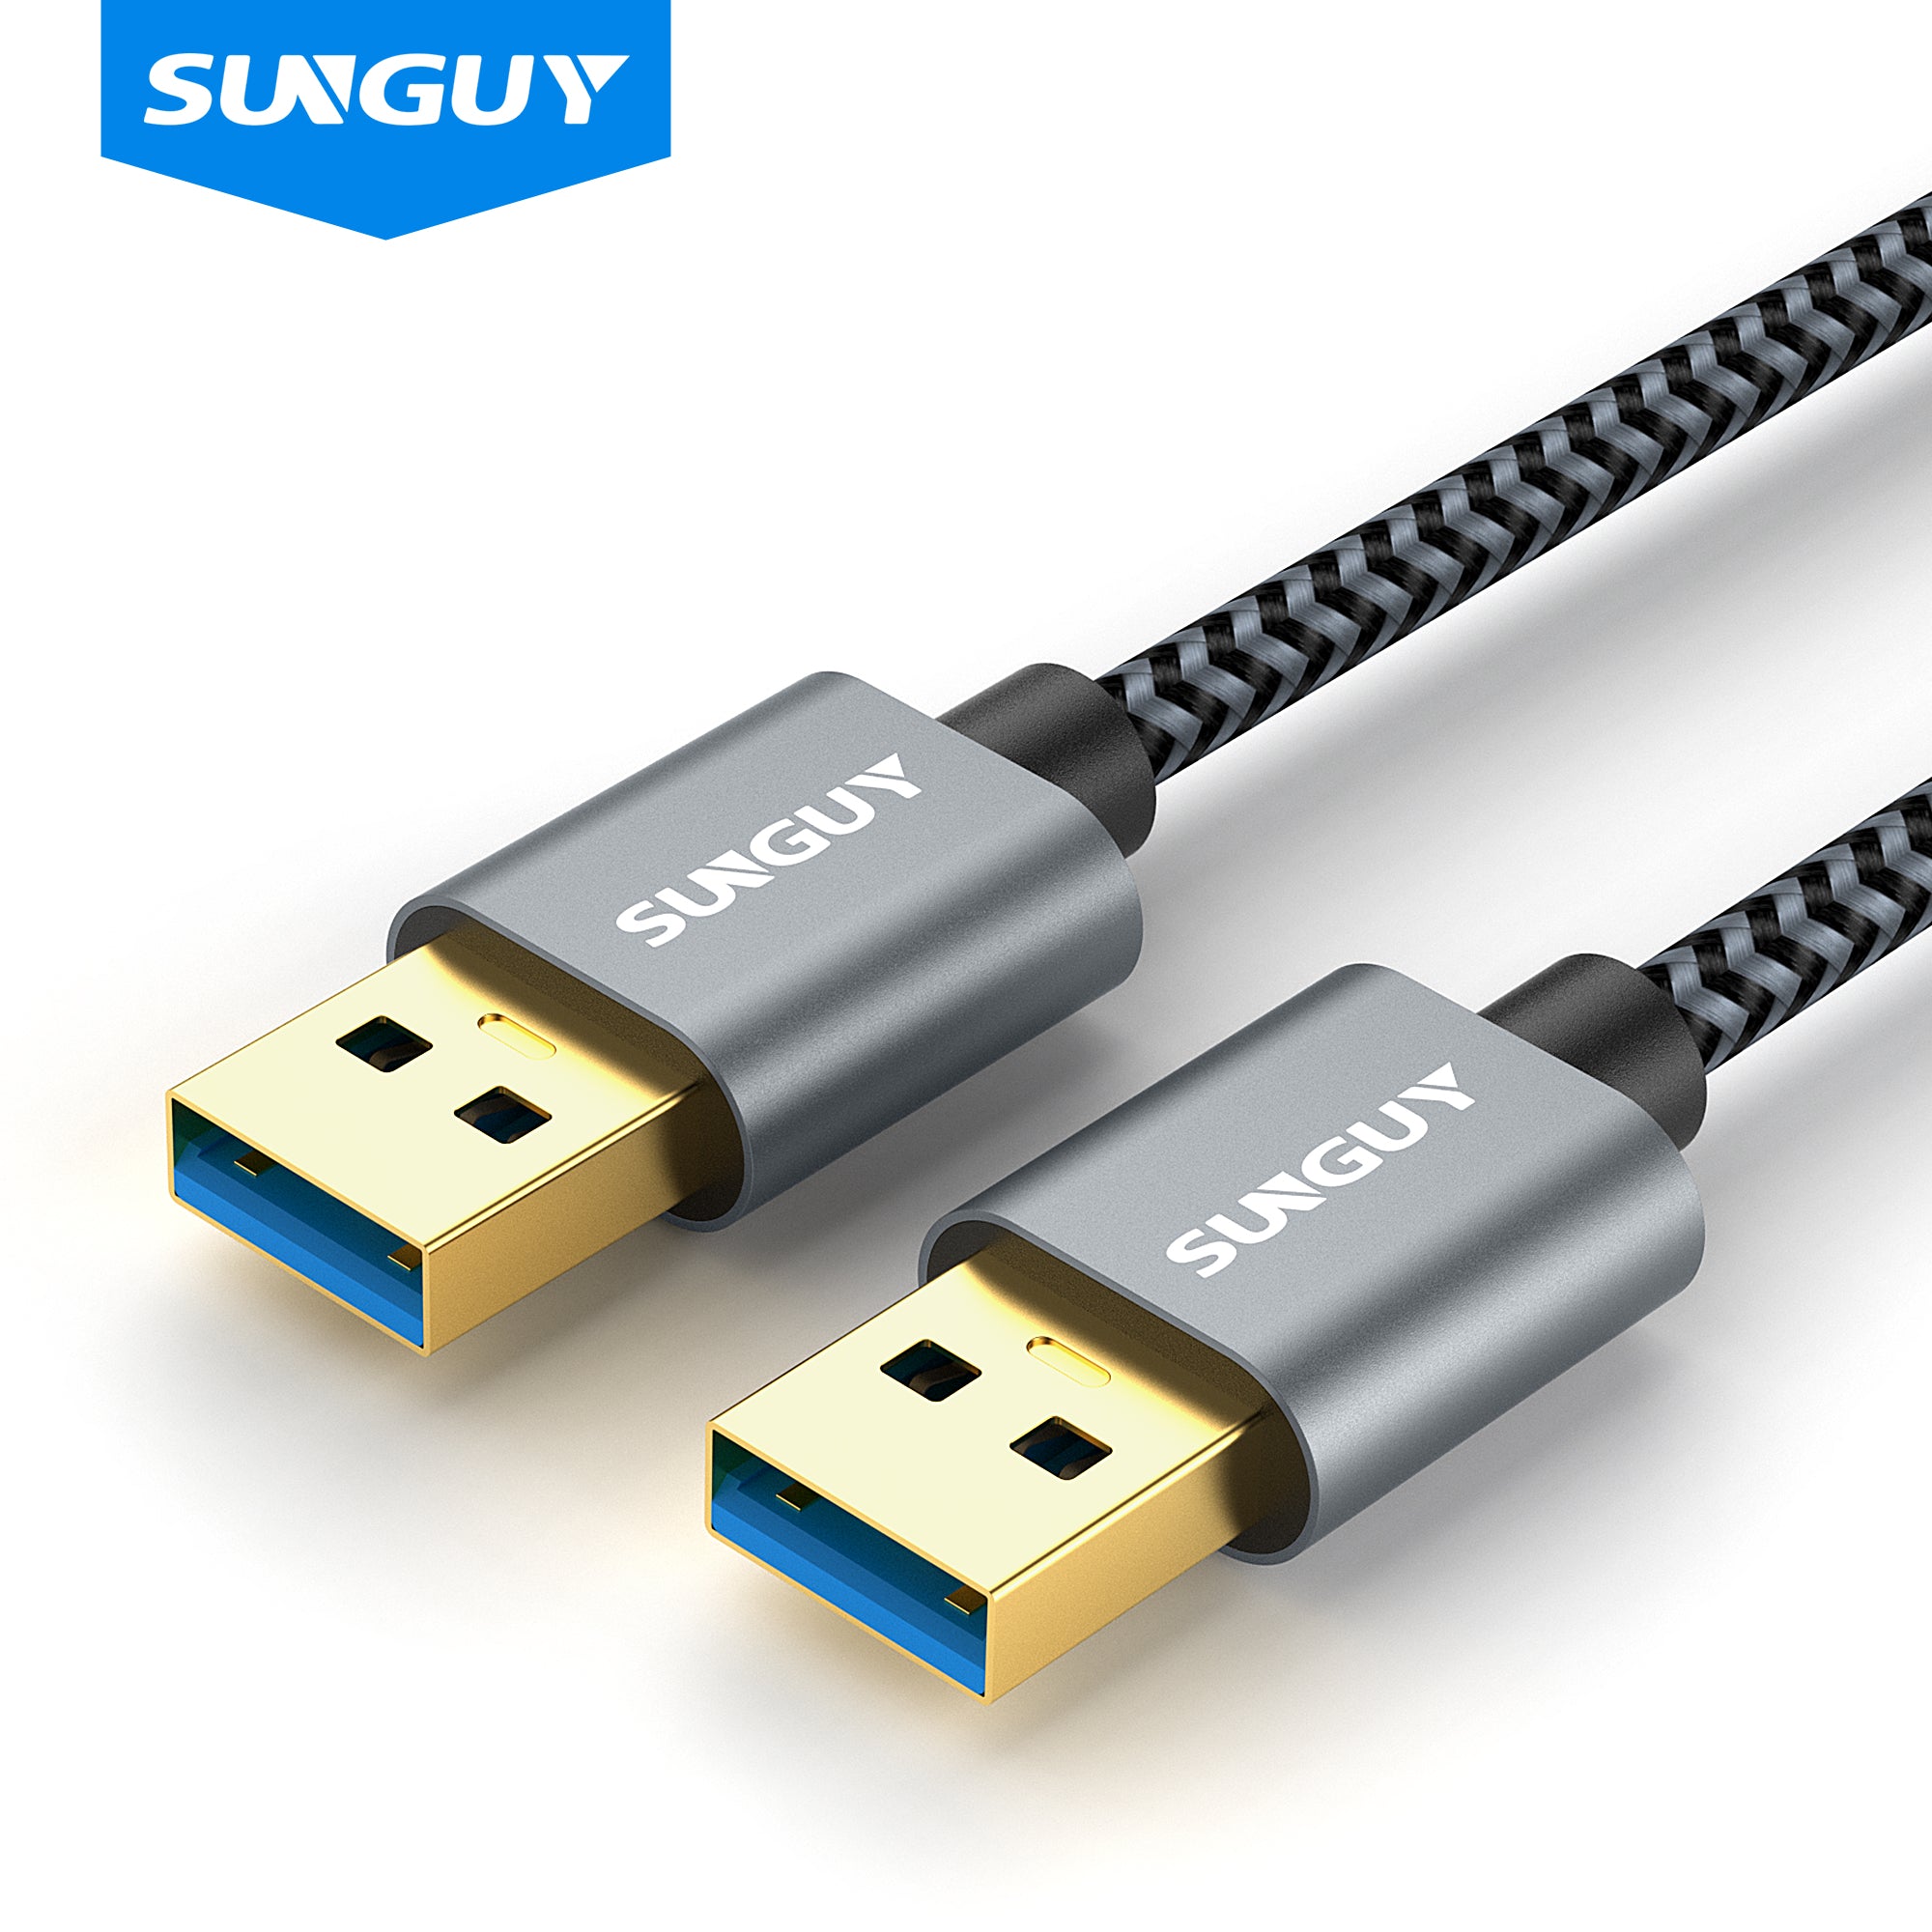 SUNGUY USB 3.0 Cable 5Gbps SuperSpeed Cable USB A male to A male Cable B106#